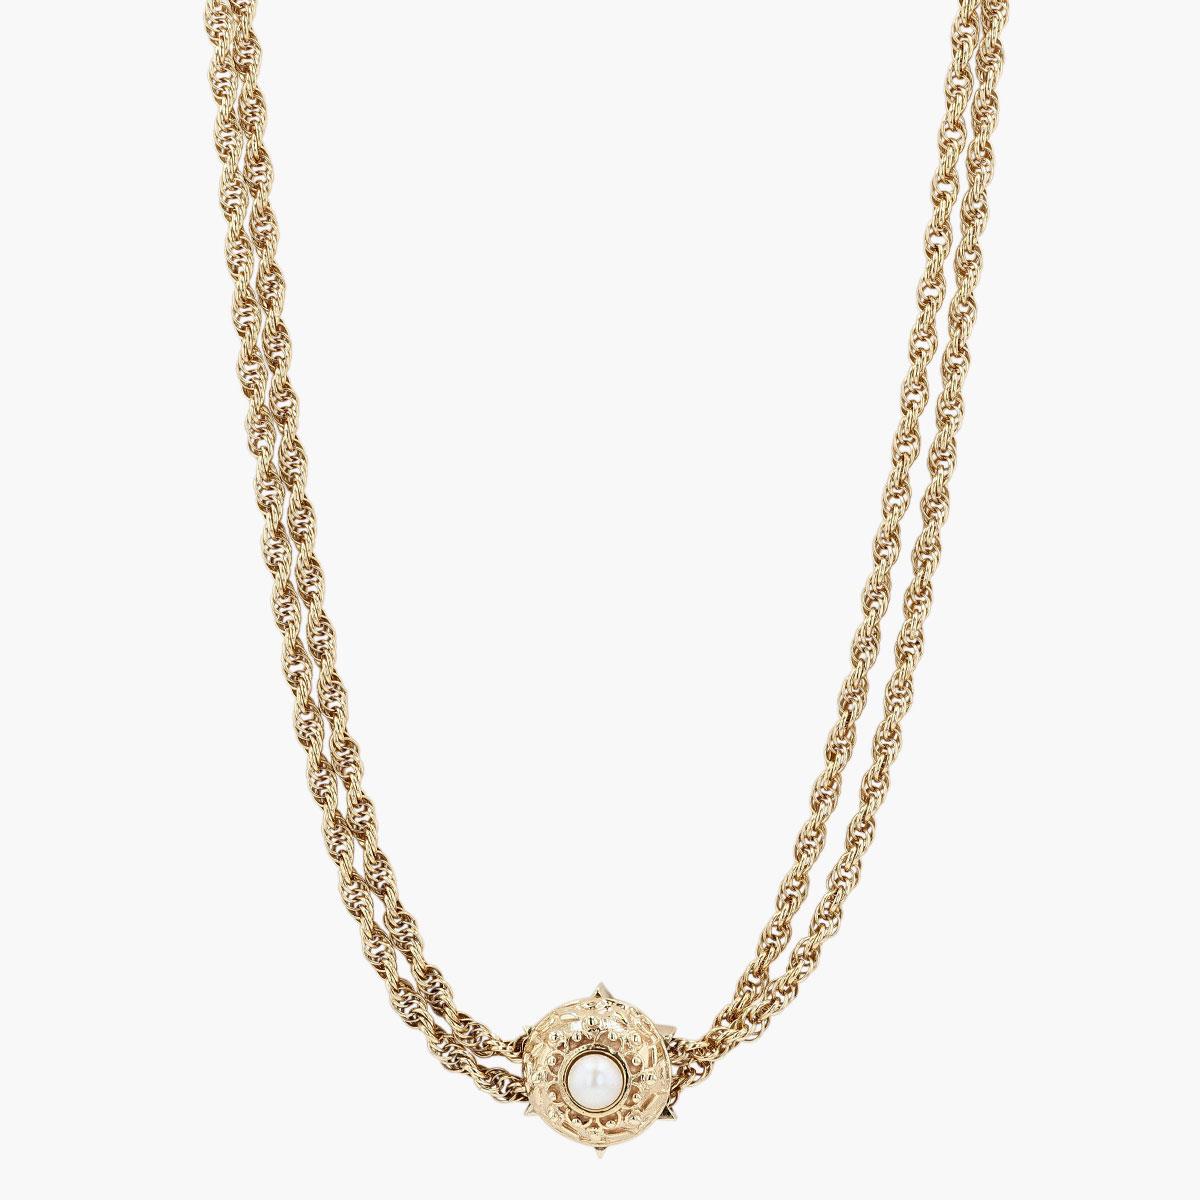 Vintage 14K Yellow Gold Rope Chain With Pearl Slide